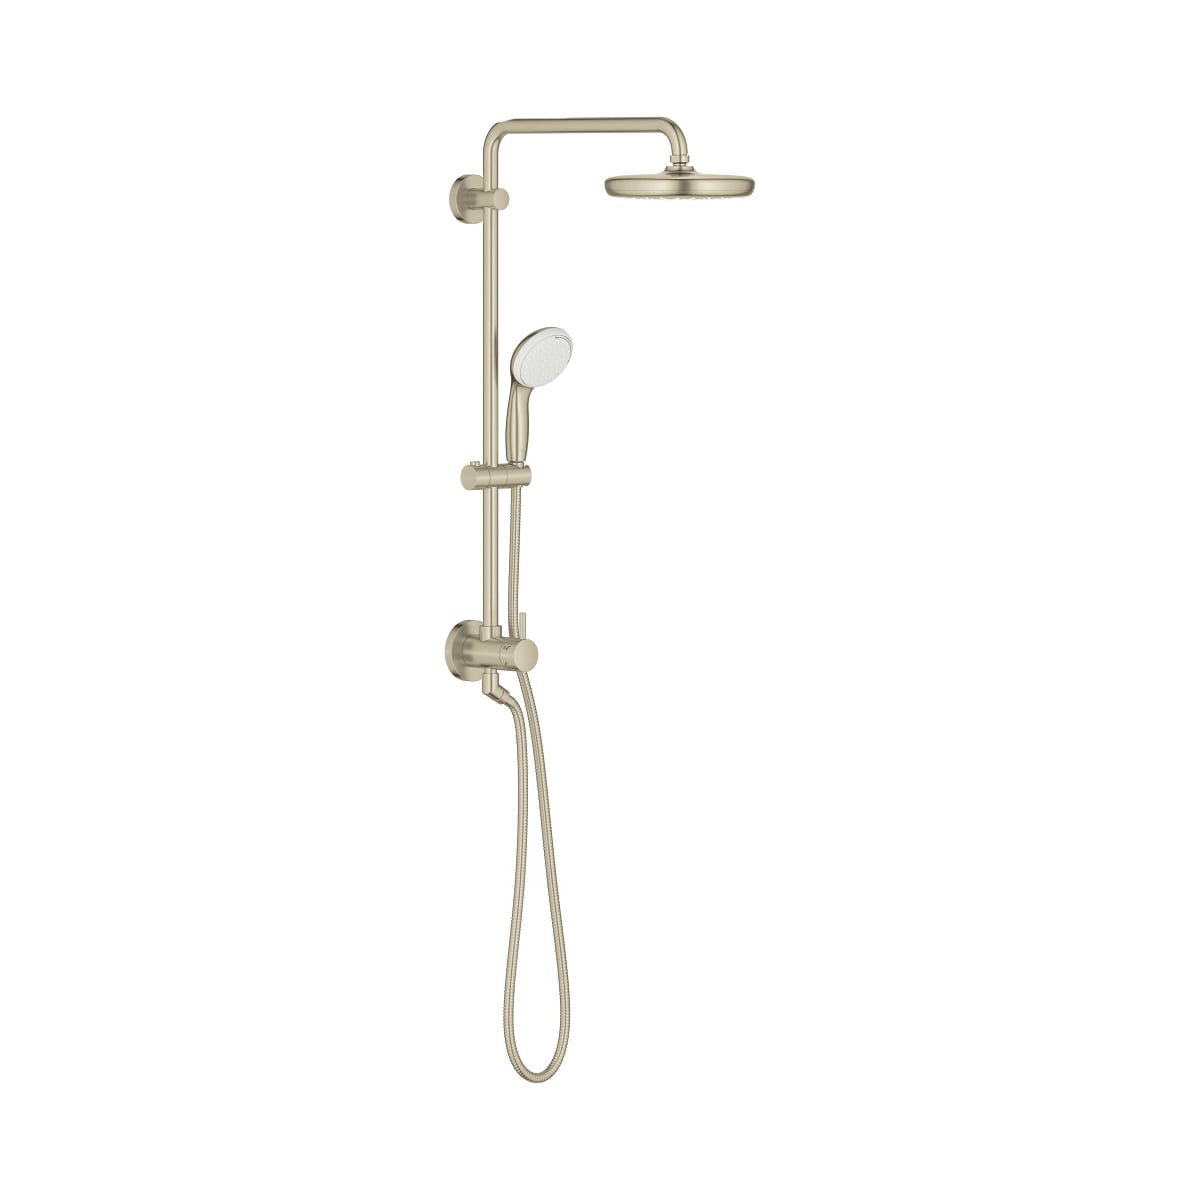 Grohe 26123en1 Brushed Nickel Retro Fit, Ceiling Shower Head Fitting